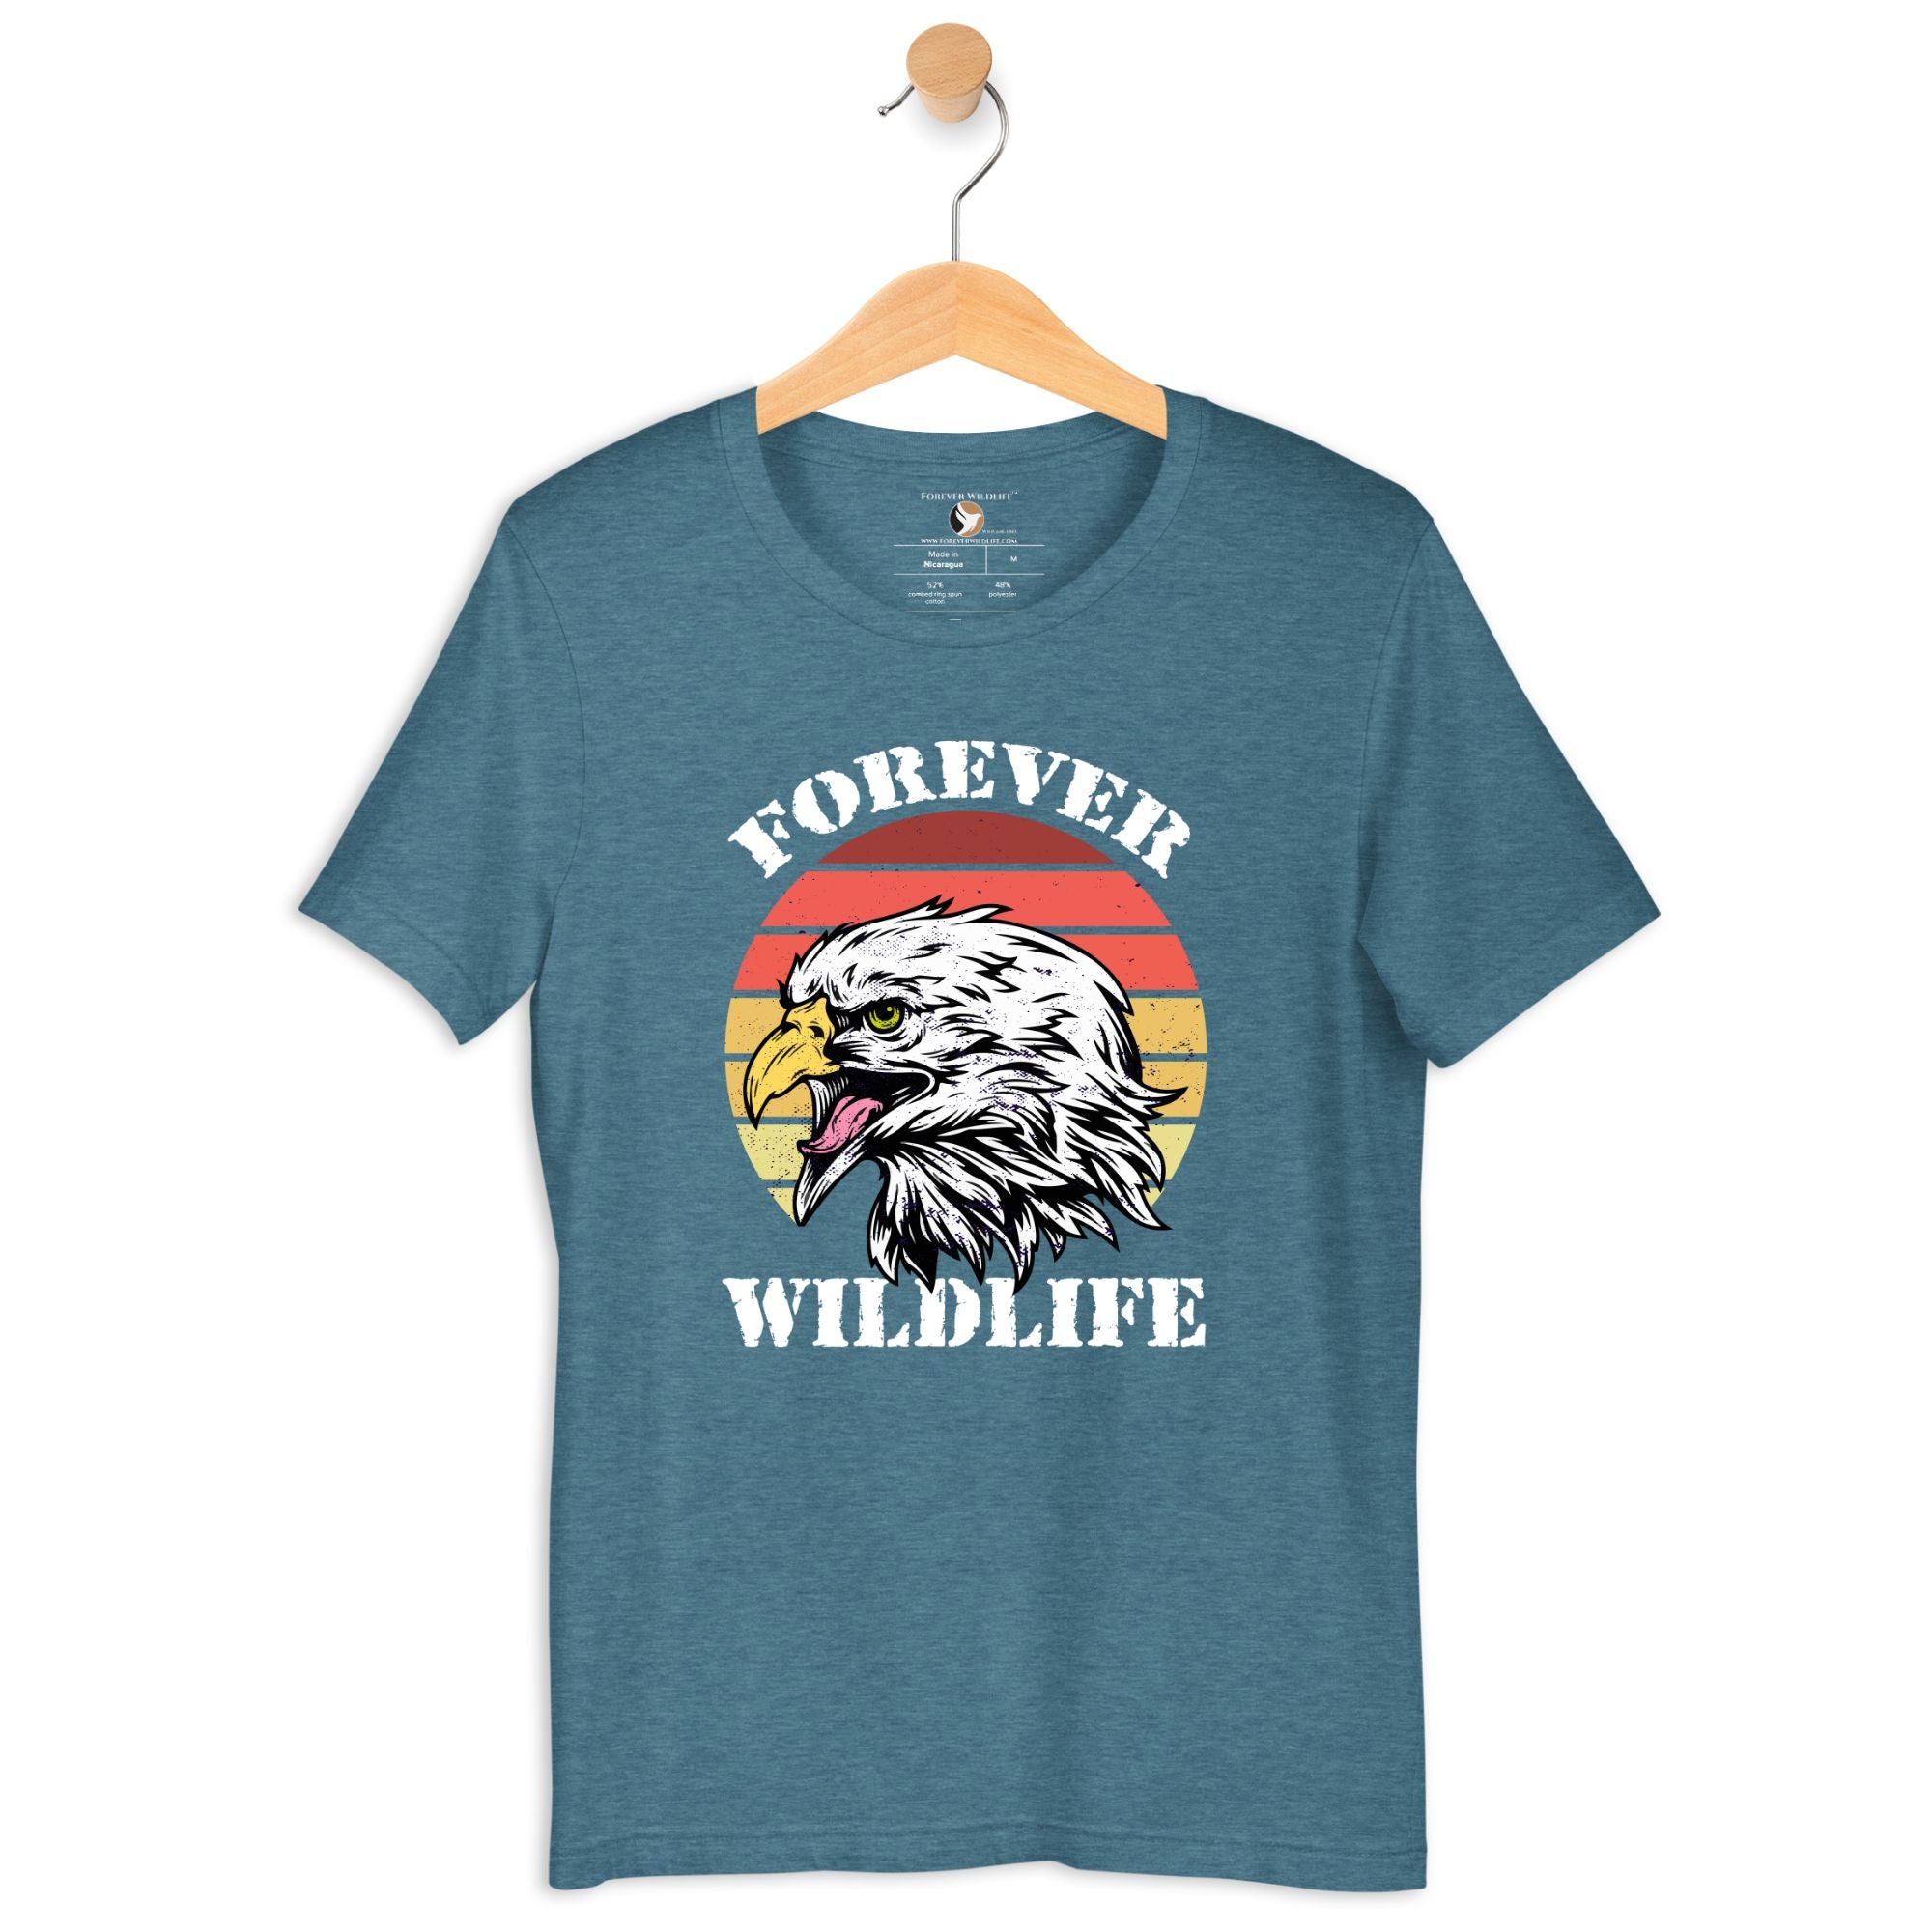 Eagle T-Shirt, Heather Tee in deep teal – Premium Wildlife T-Shirt Design, Eagle Shirts and Wildlife Clothing from Forever Wildlife